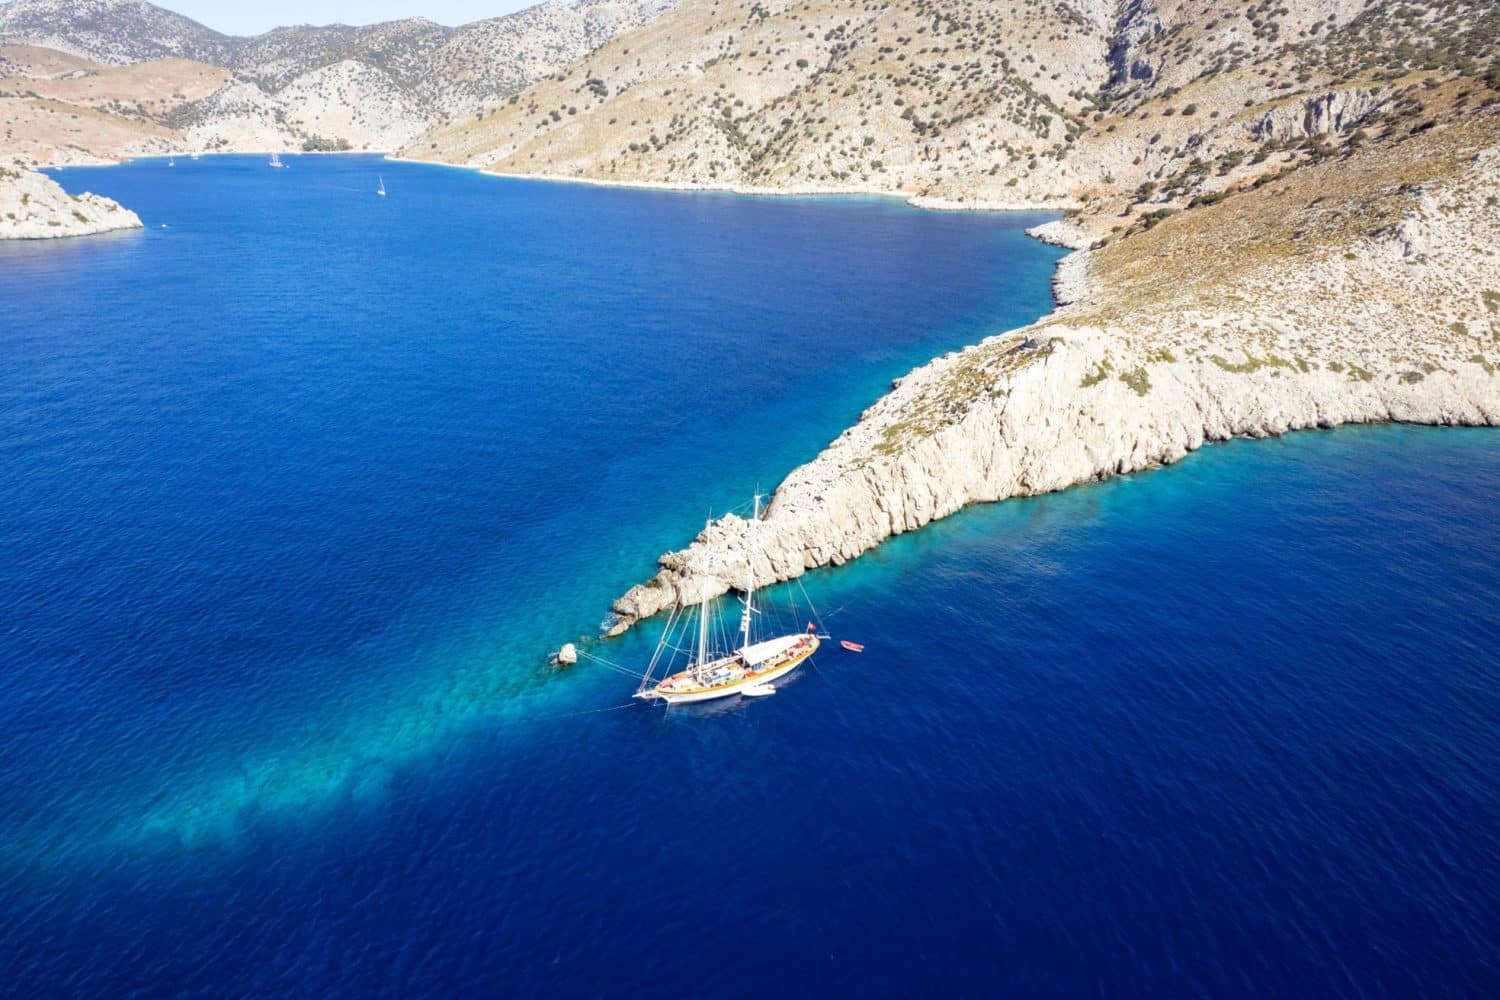 Blue Cruise from Marmaris to Datca